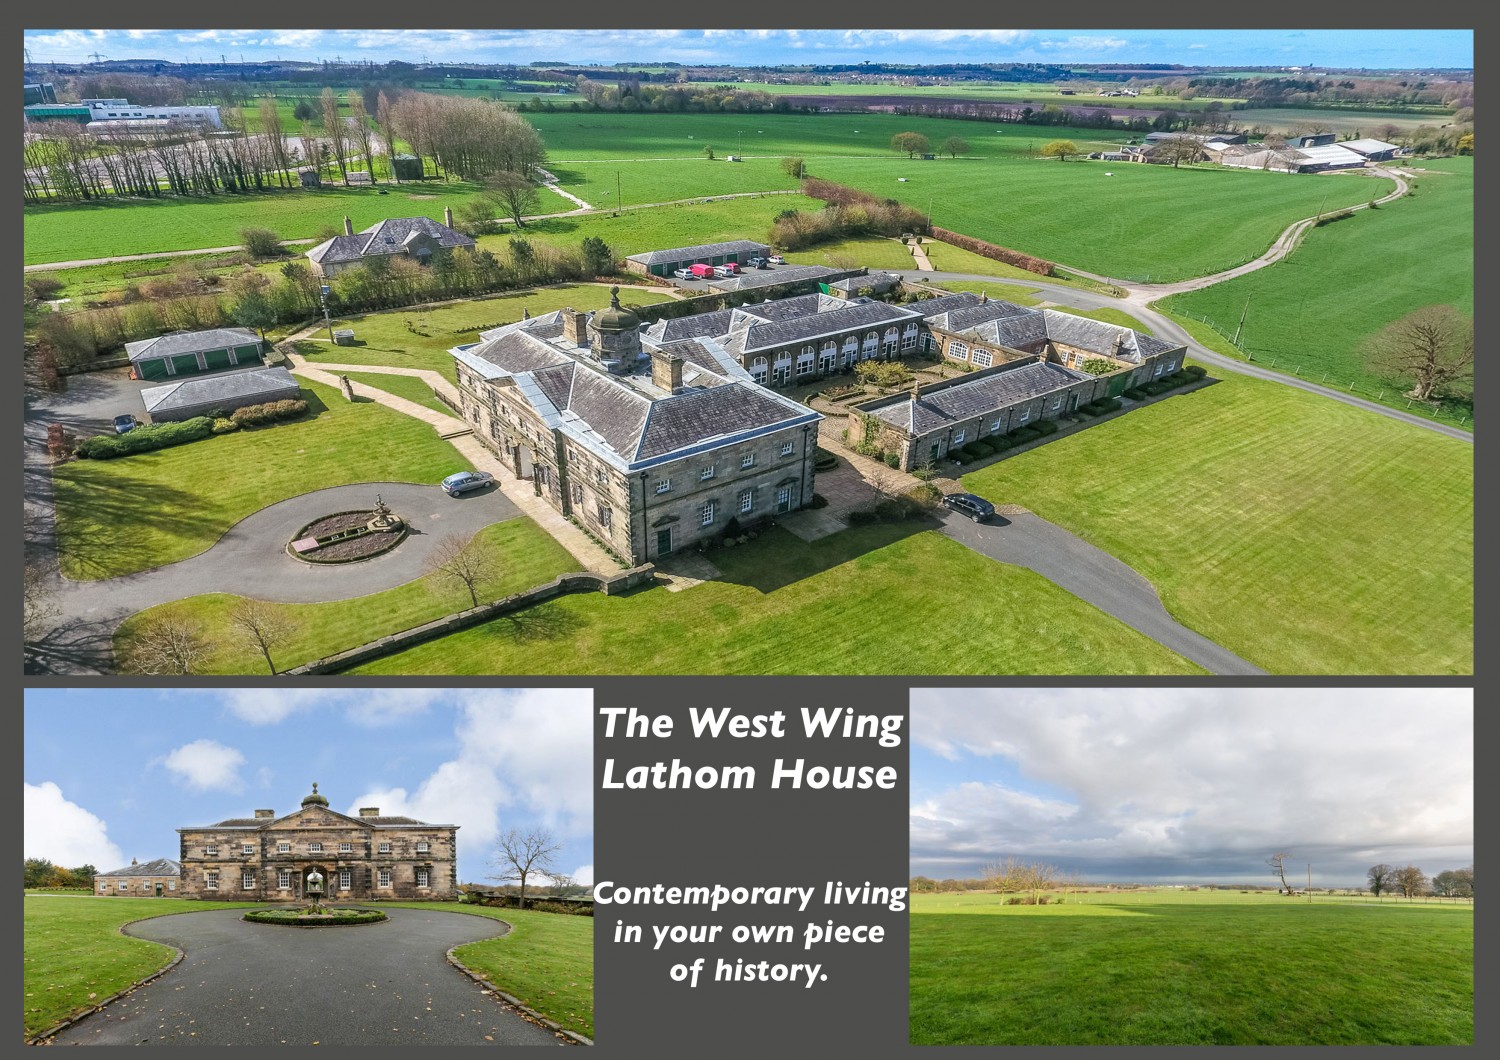 The West Wing, Lathom House